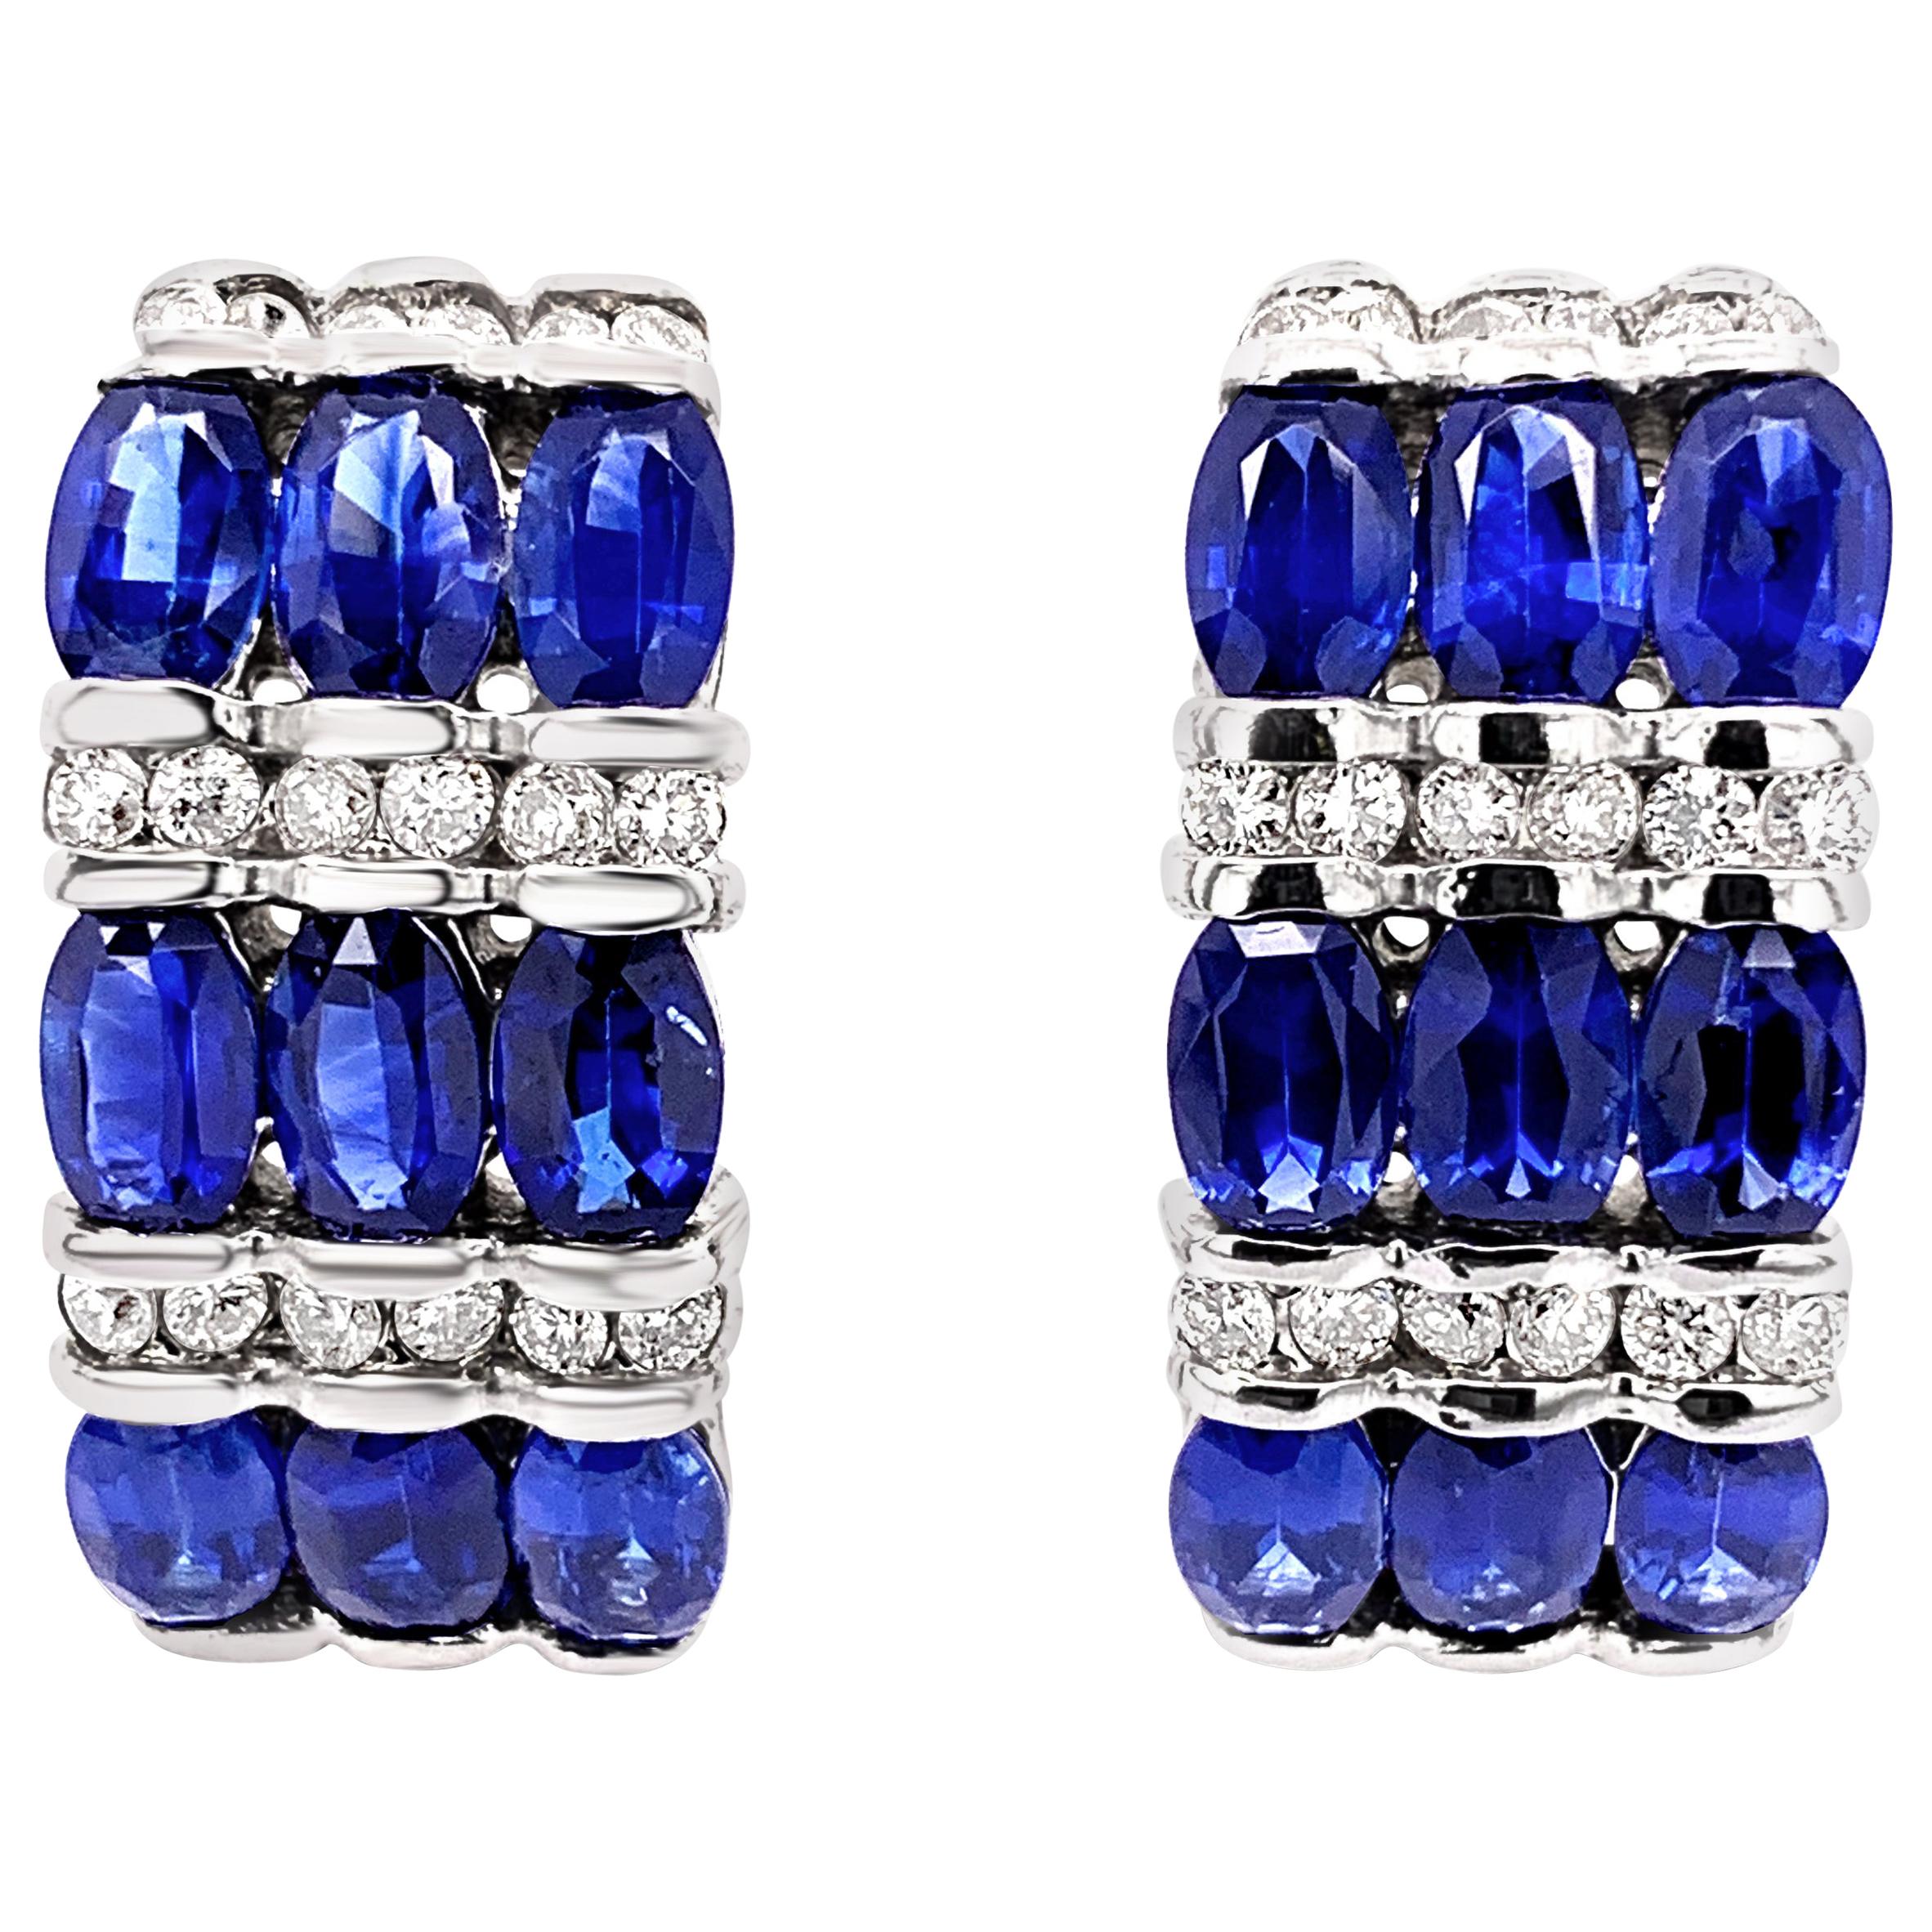 4.91 Carat 'Total Weight' Oval Sapphire and Diamond Earrings in 18K White Gold